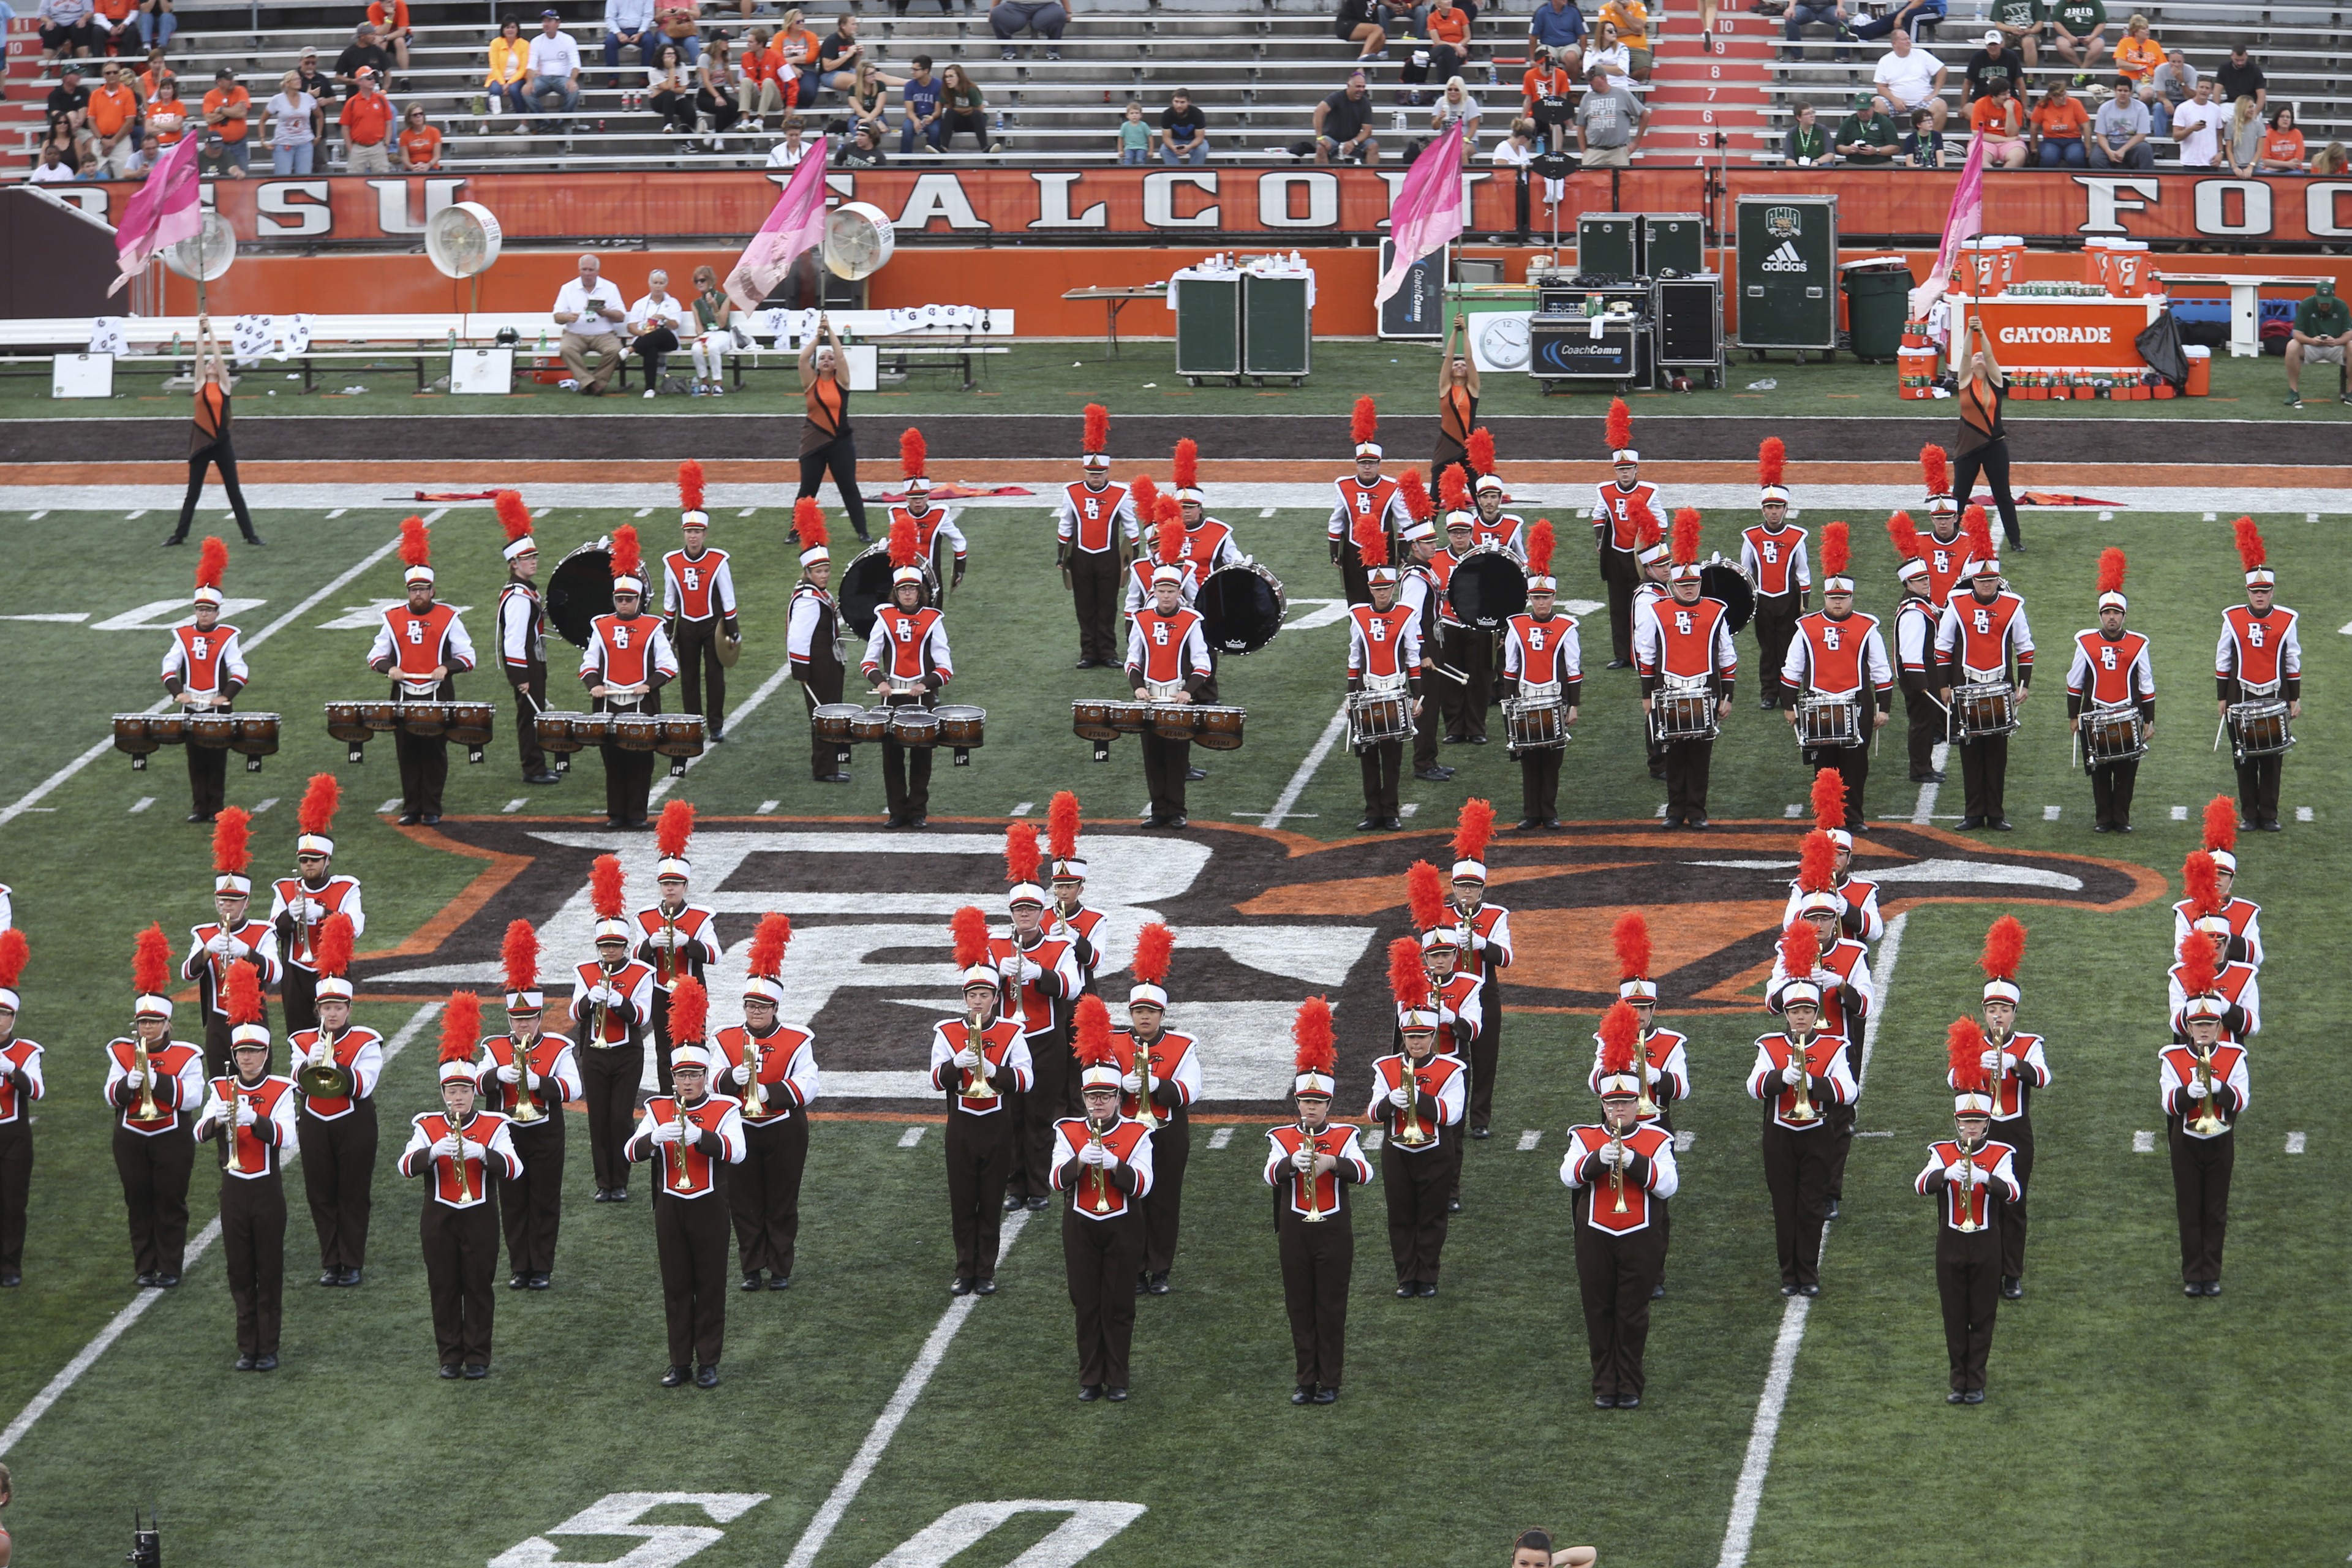 Marching band members stand near the 50 yard line at Doyt L. Perry Stadium